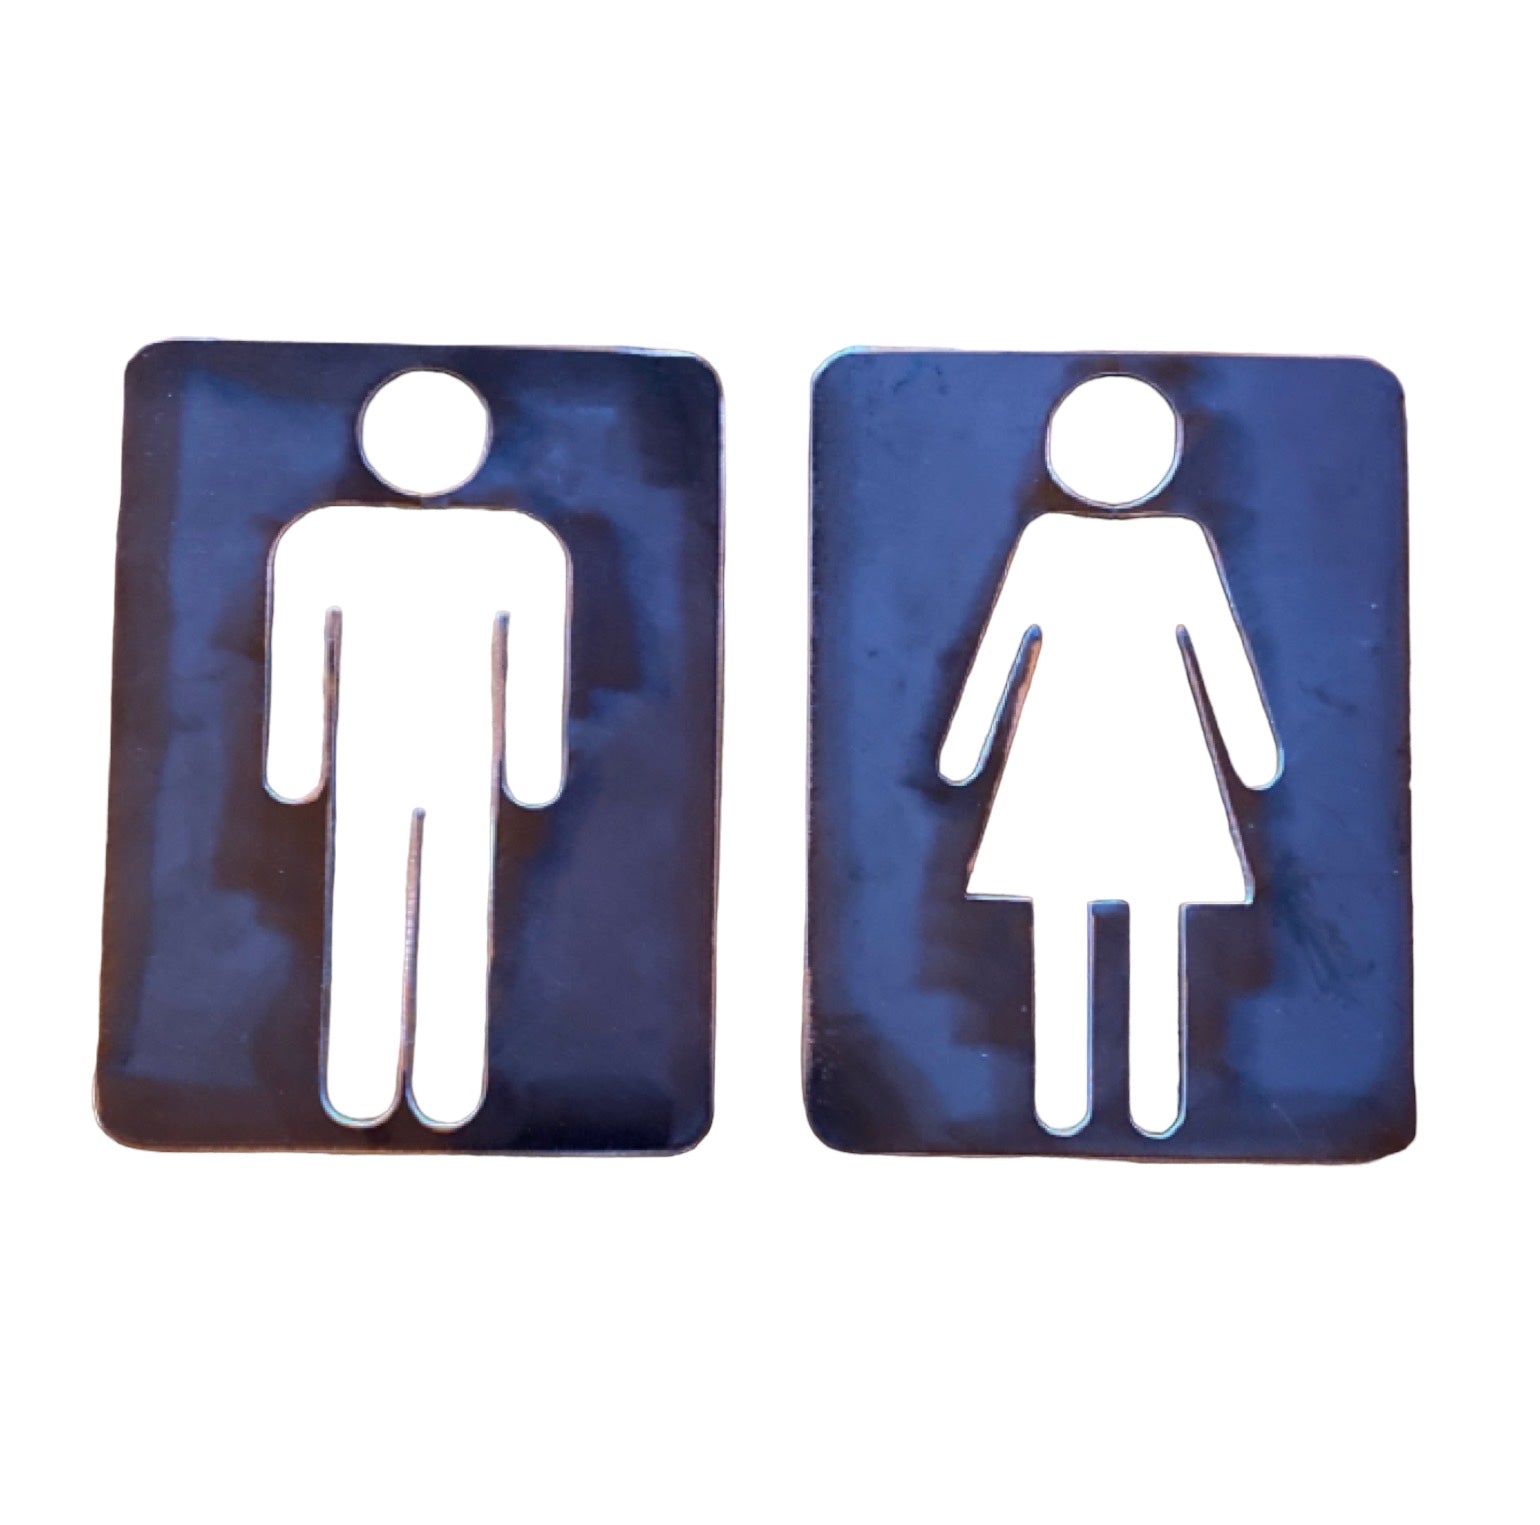 Toilet Male Female Set 2 Steel Metal Sign - The Renmy Store Homewares & Gifts 